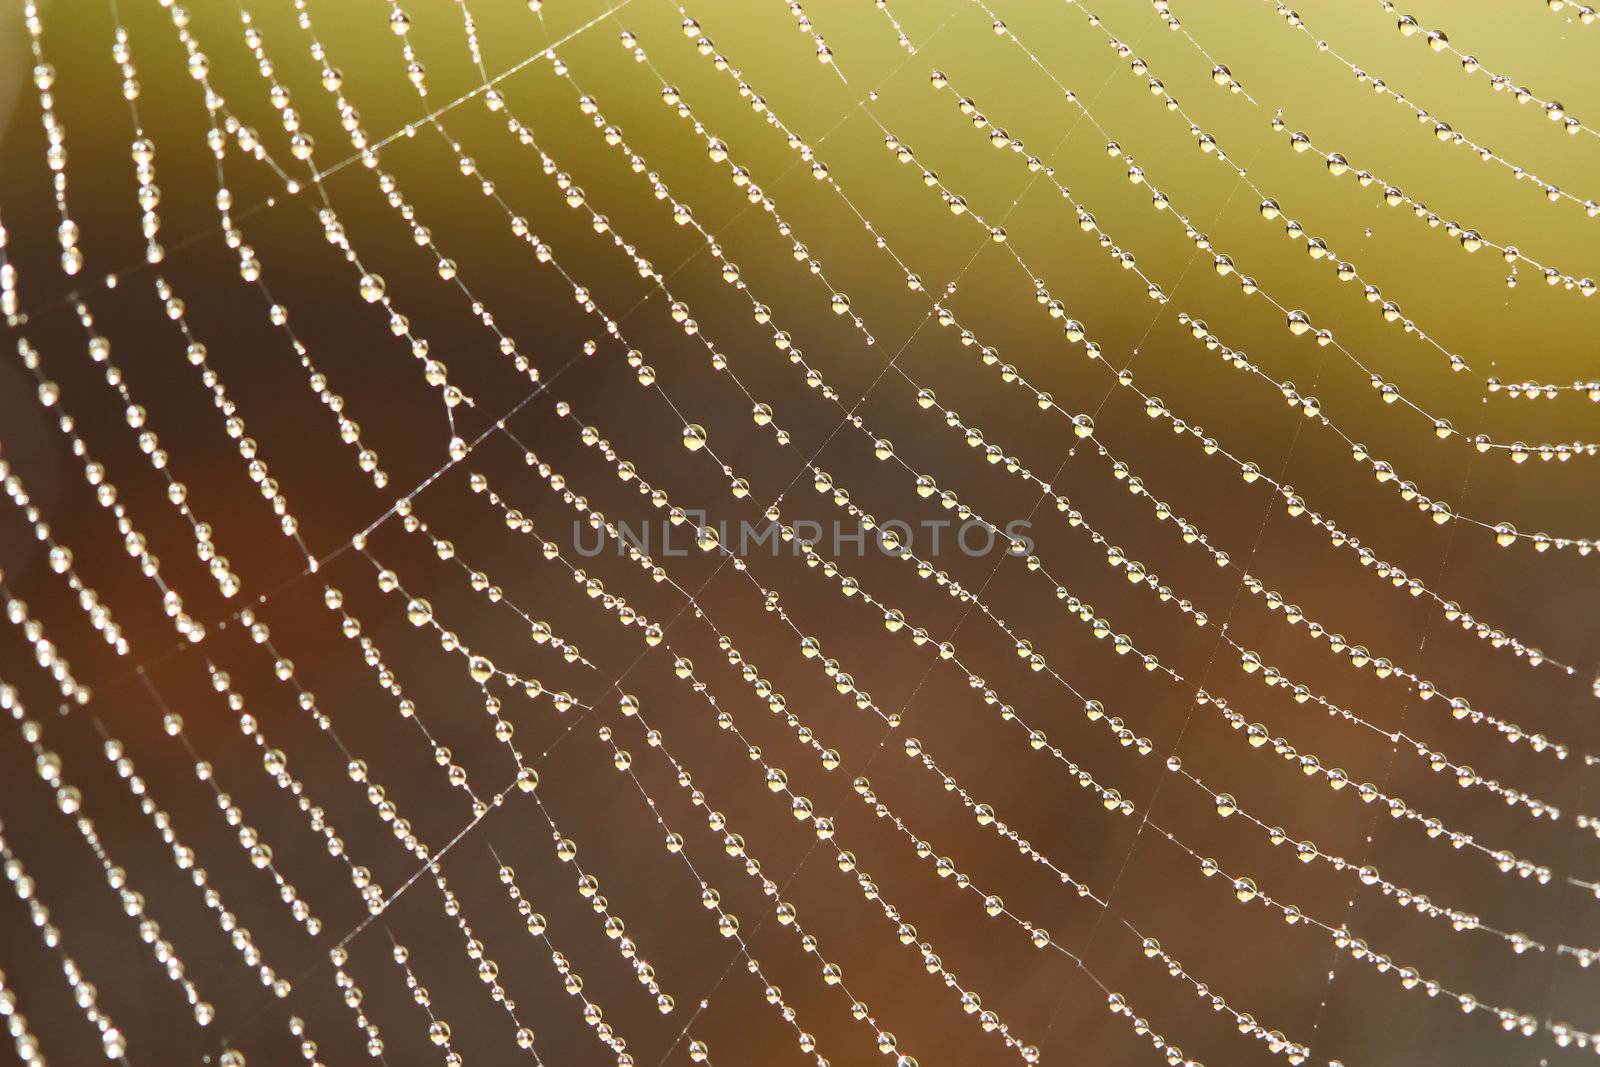 Spider Web Covered with Sparkling Dew Drops by bajita111122